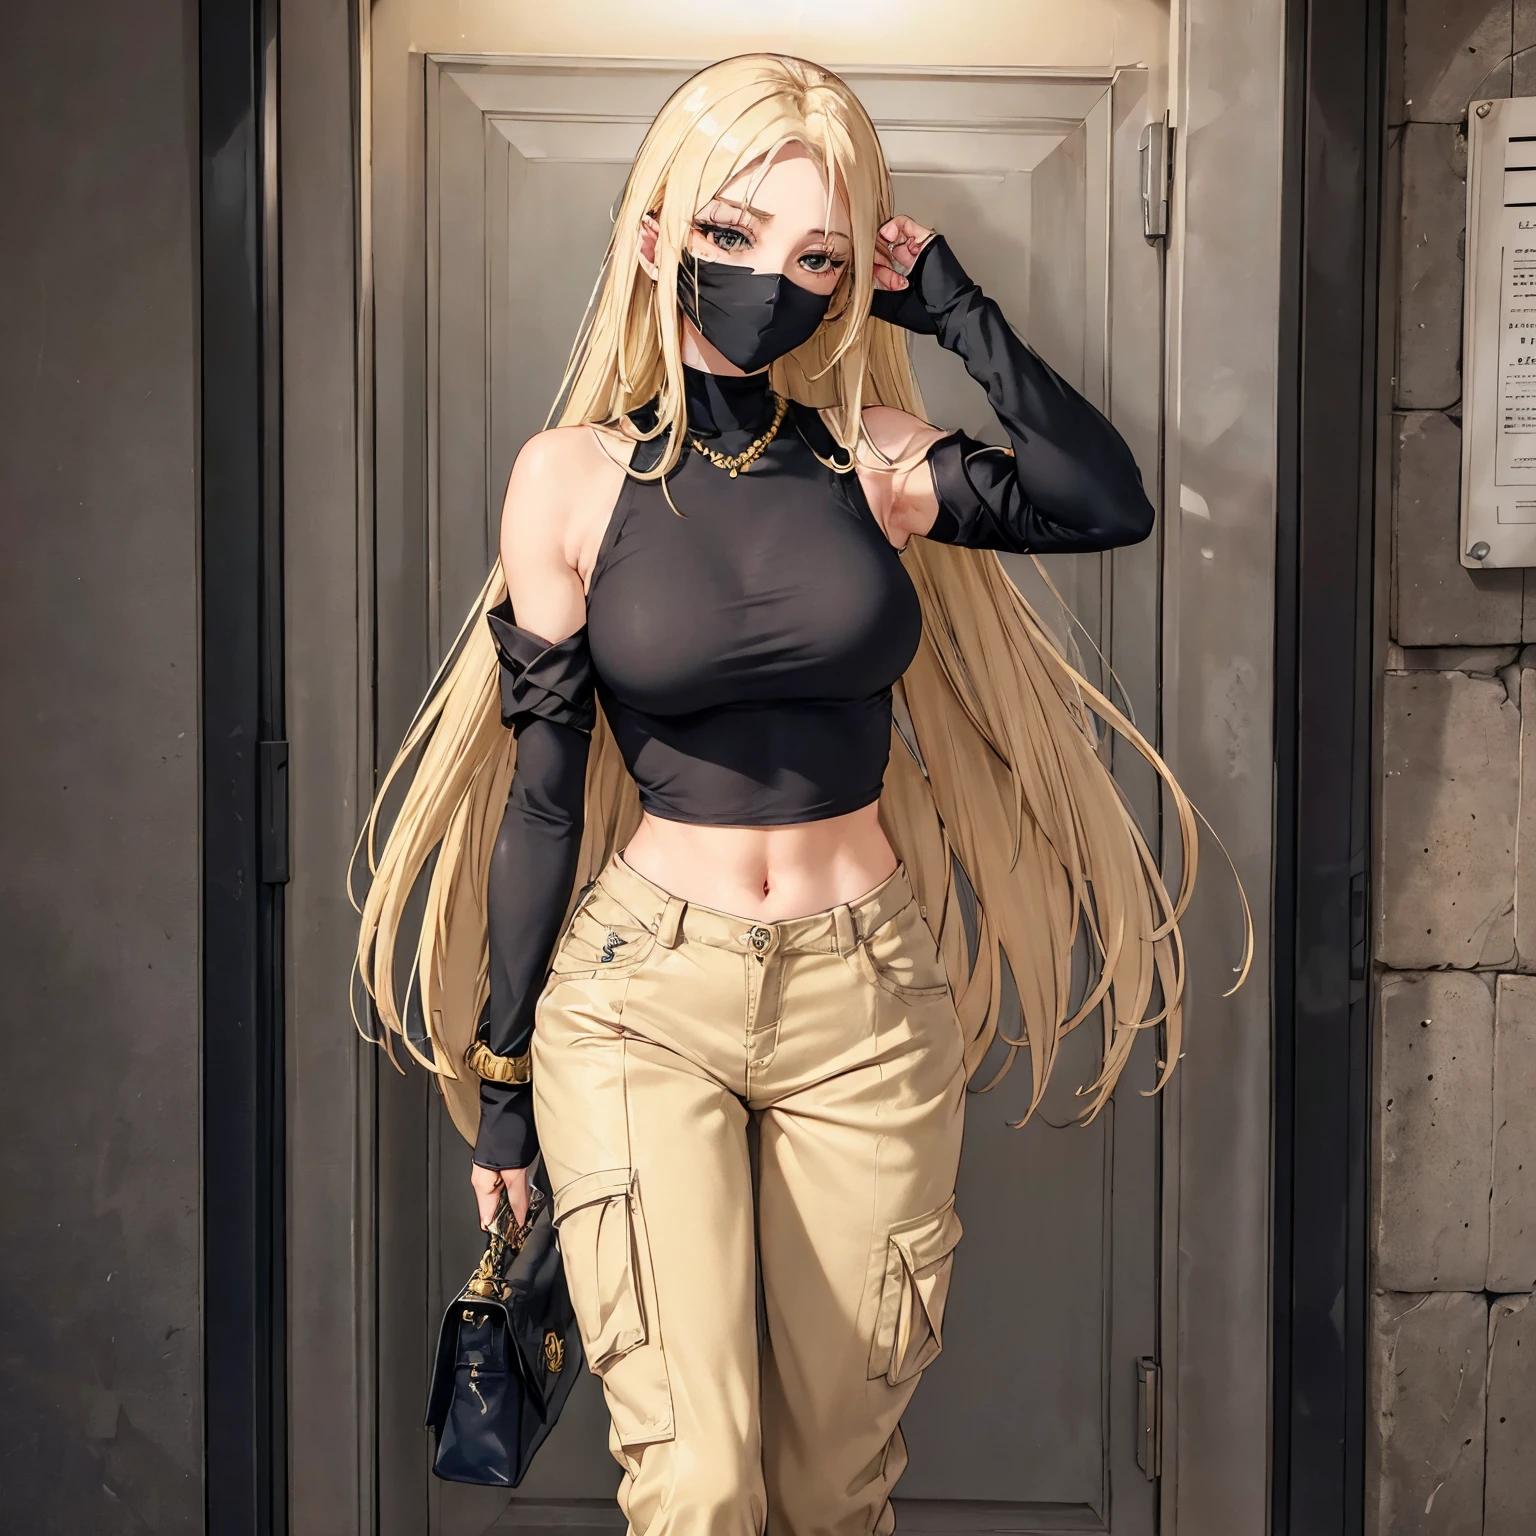 (tall,strong,confident) woman in a (white coat) with a (dark blue crop top) and (beige cargo pants). She has (ripped sleeves) and (long blonde hair) flowing down to her waist. Her face is covered by a (white mask with black markings), giving her an air of mystery. On her wrists and feet, she wears (golden bead bracelets) that add a touch of elegance. The (white coat) contrasts with her (golden hair) and the dark colors of her outfit, creating a visually striking image.

The woman stands tall, exuding (confidence) and (strength). She has a commanding presence, owning the space around her. Her (long blonde hair) cascades down her back, adding movement and a sense of dynamism to the scene. The (ripped sleeves) of her coat suggest a rebellious nature, while the (beige cargo pants) imply a practical and versatile style.

The choice of a (white mask with black markings) adds intrigue and a hint of danger. It obscures her face, making it difficult to discern her true emotions and intentions. The contrasting colors of the mask create a bold visual element, drawing attention to her face and adding an Element of mystery to the overall composition.

The (golden bead bracelets) on her wrists and feet bring a touch of glamour and femininity to the scene. They catch the light, glinting and shimmering with every movement, reflecting her inner strength and confidence.

Overall, the image captures a (tall,strong,confident) woman with a striking sense of style. The combination of her (white coat), (dark blue crop top), and (beige cargo pants) creates a visually appealing and harmonious color palette. Her long blonde hair and the golden accessories add a touch of elegance and glamour to the scene. The (ripped sleeves) and hint at a rebellious and mysterious nature. The image is of (high quality) and has (realistic,photorealistic) details, reflecting the beauty and complexity of the subject. One woman, one female